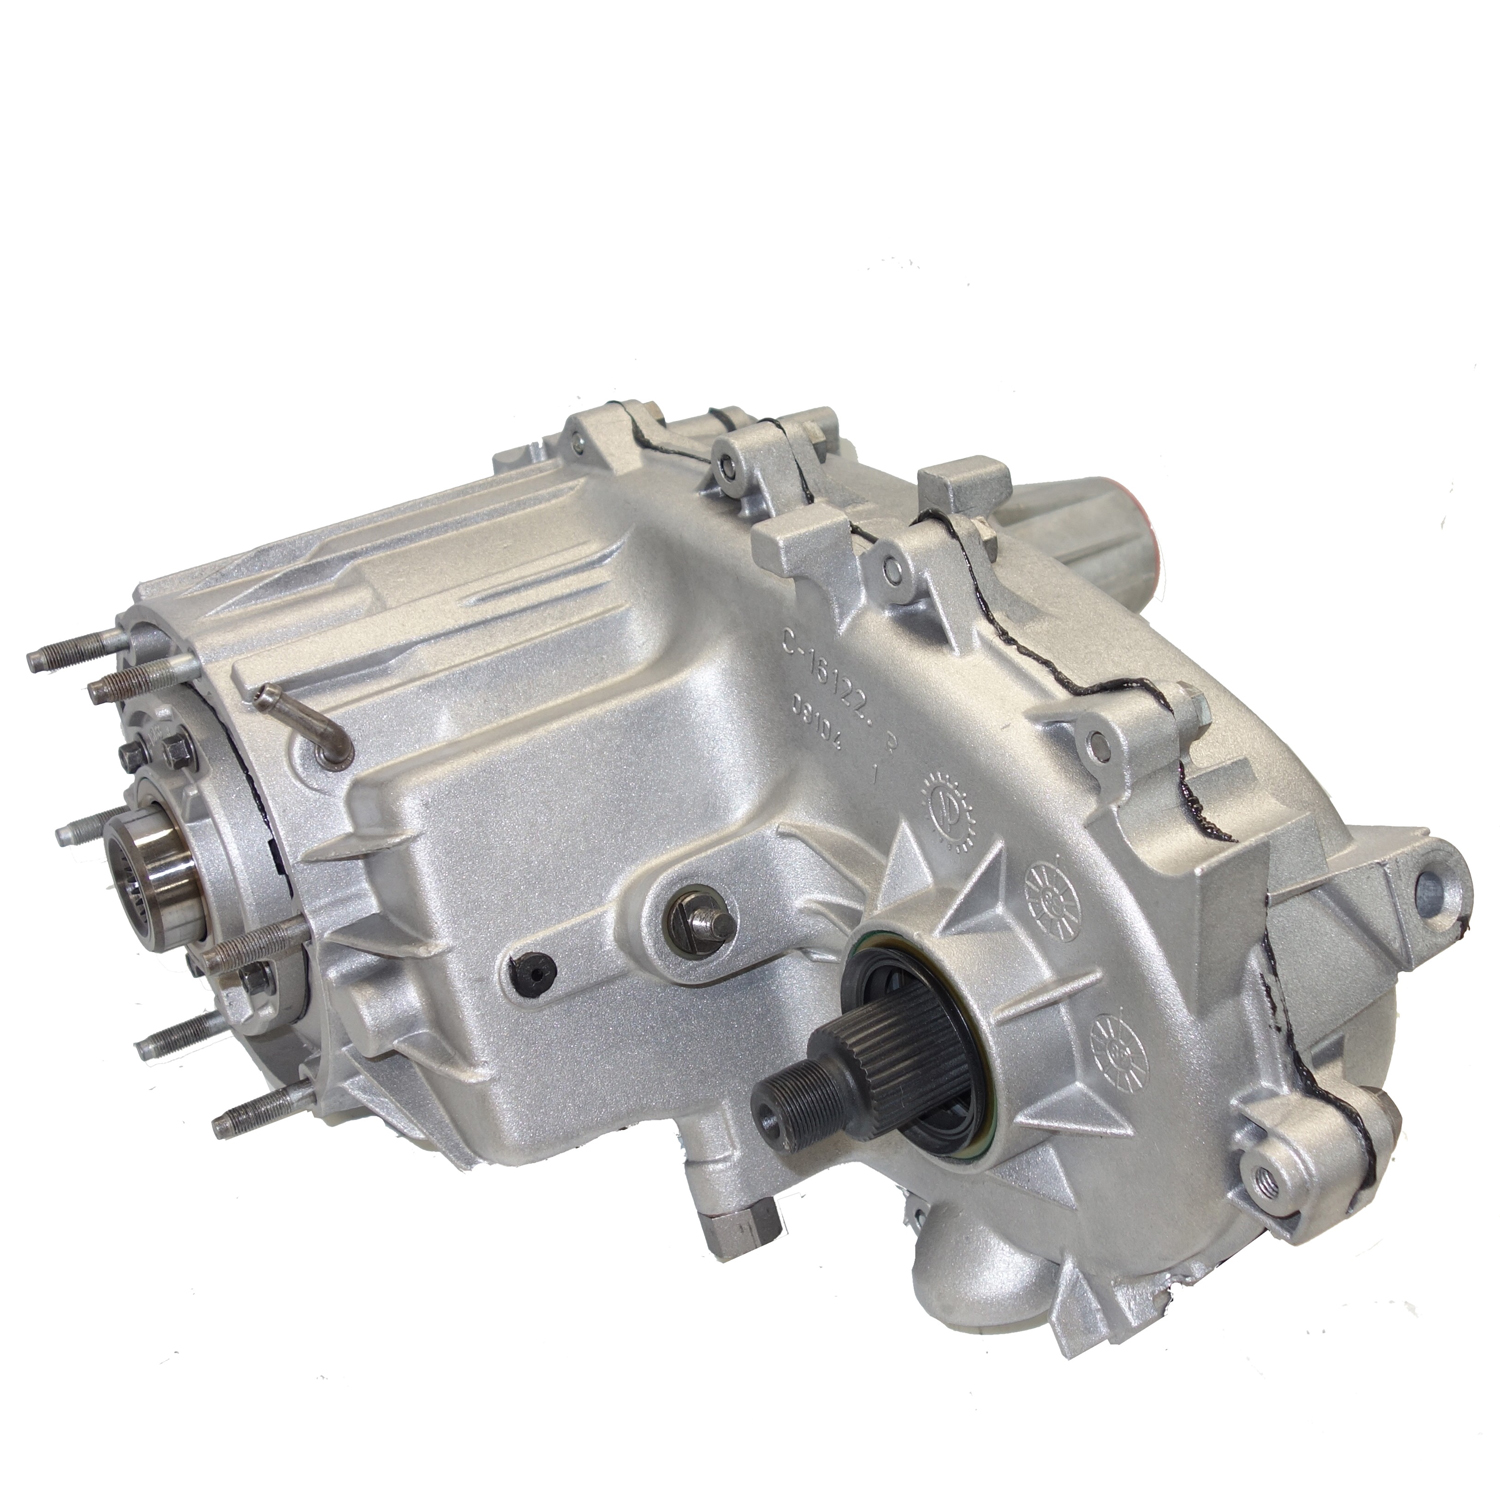 NP242 Transfer Case for Jeep 93-95 Grand Cherokee